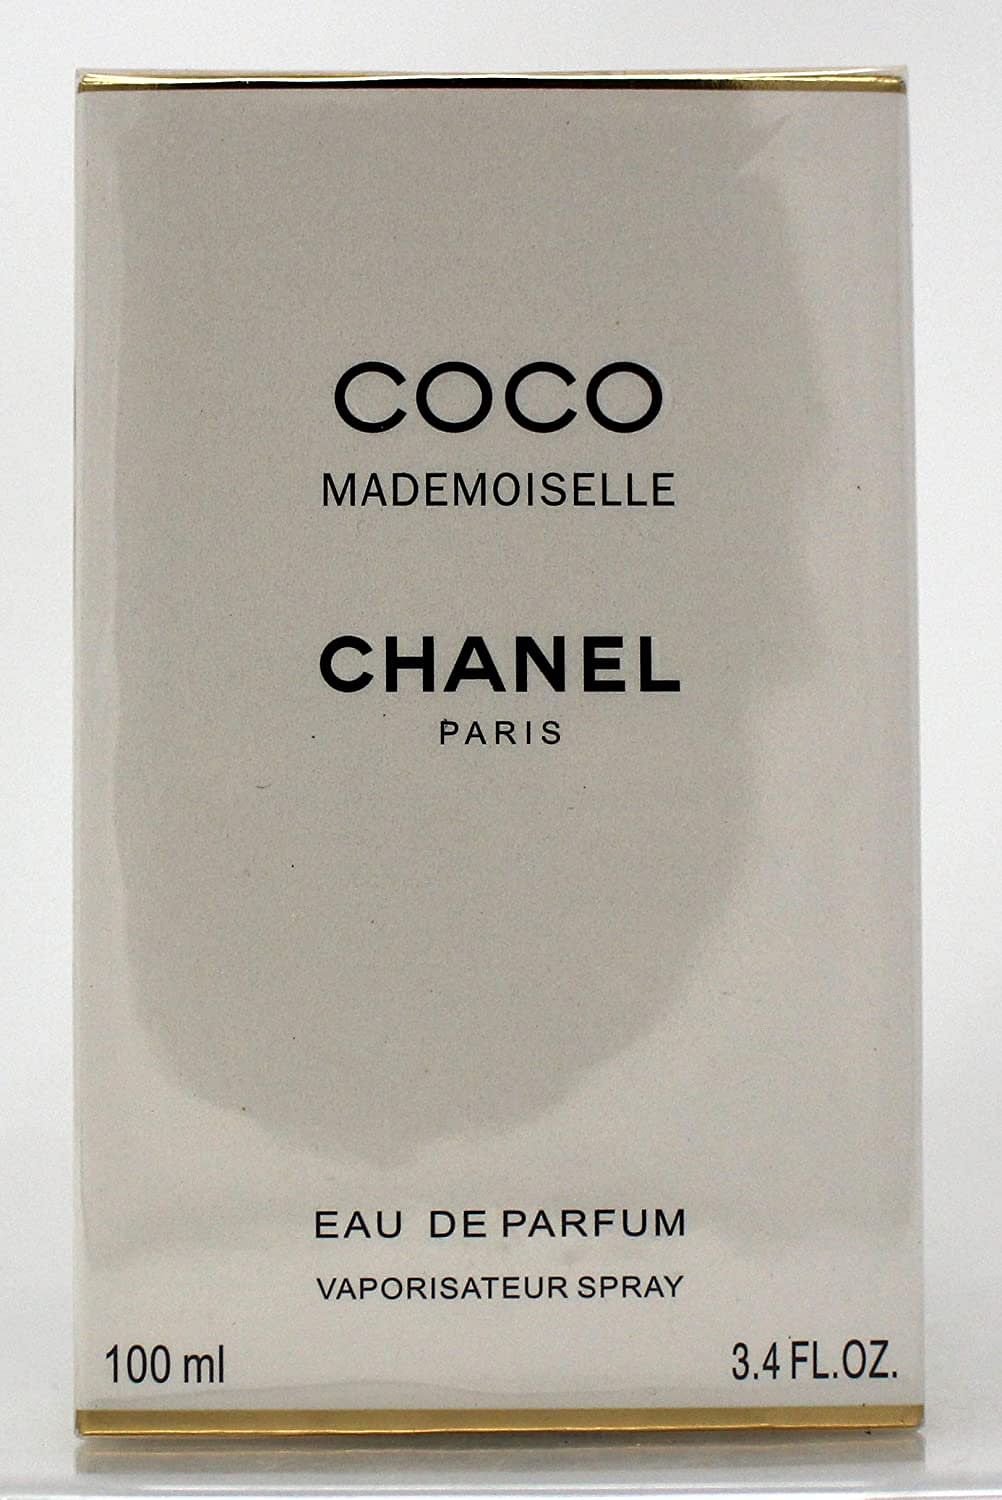 Coco Mademoiselle by Chanel for Women - 3.4 oz EDP Spray